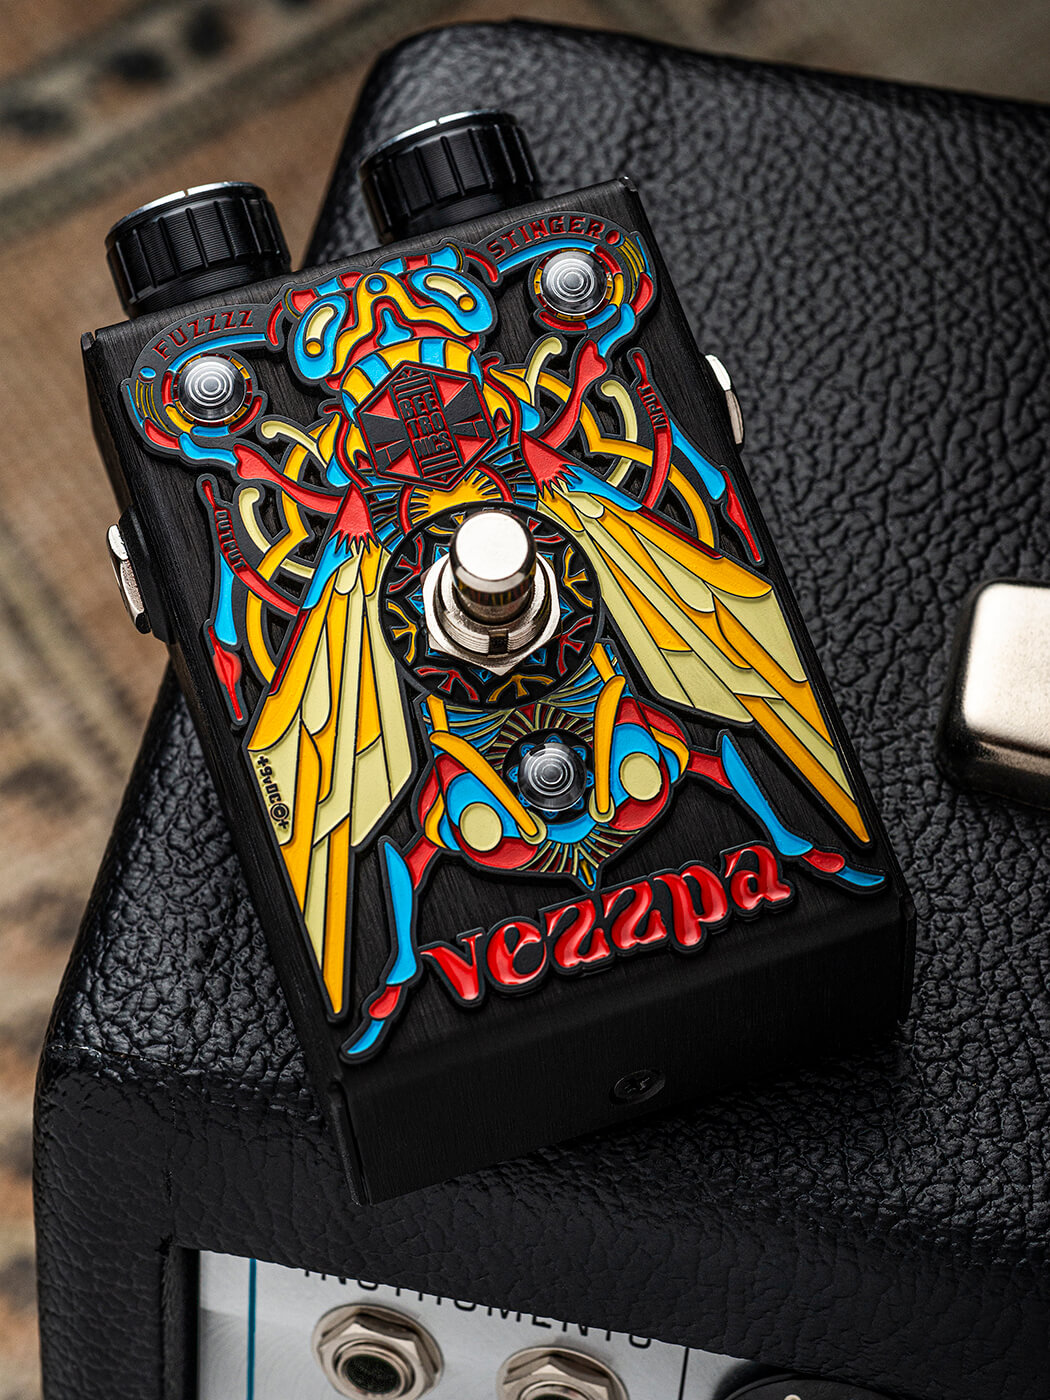 Beetronics Vezzpa Octave Stinger review: angry, inspiring and all 